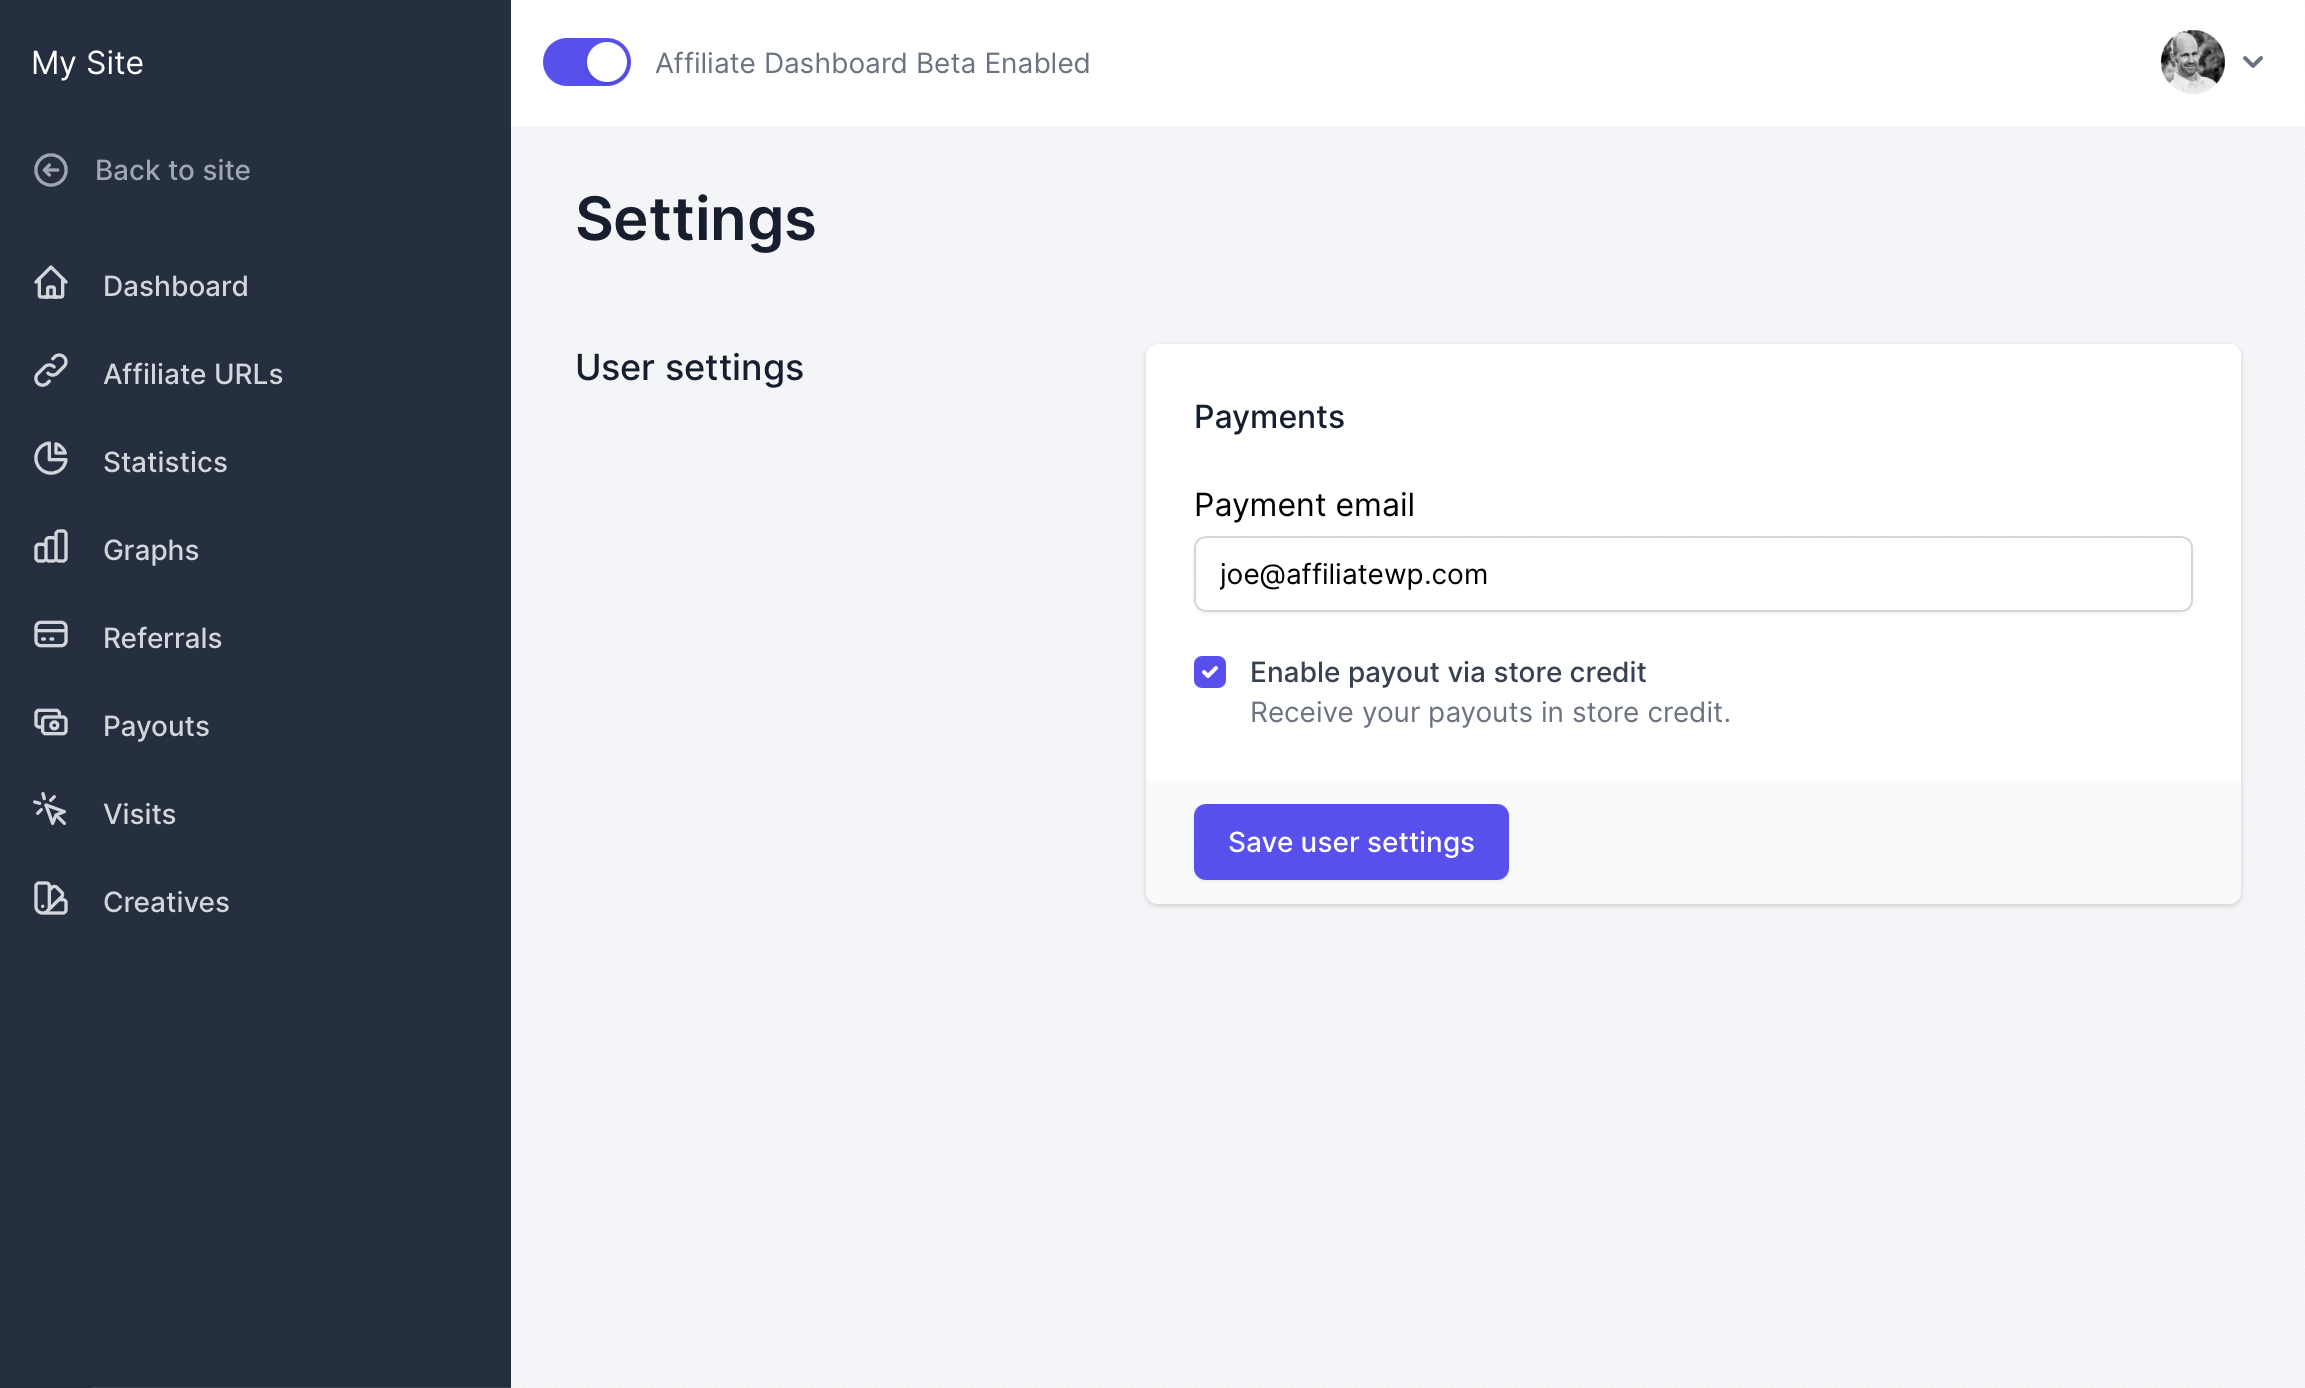 The Settings screen where an affiliate can enable payouts via store credit